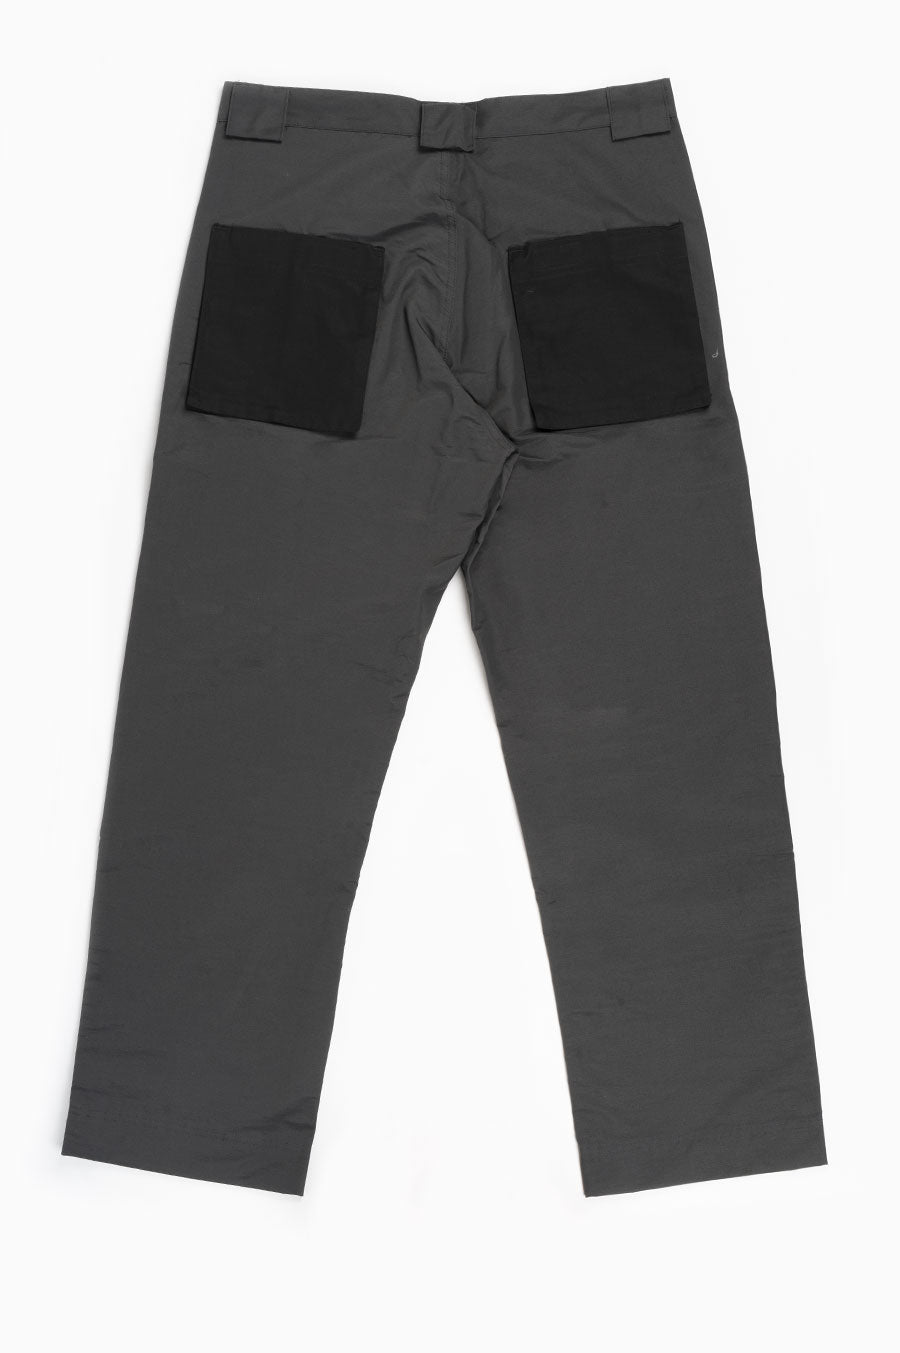 HOUSE OF PAA UTILITY PANT 1.5 CHARCOAL